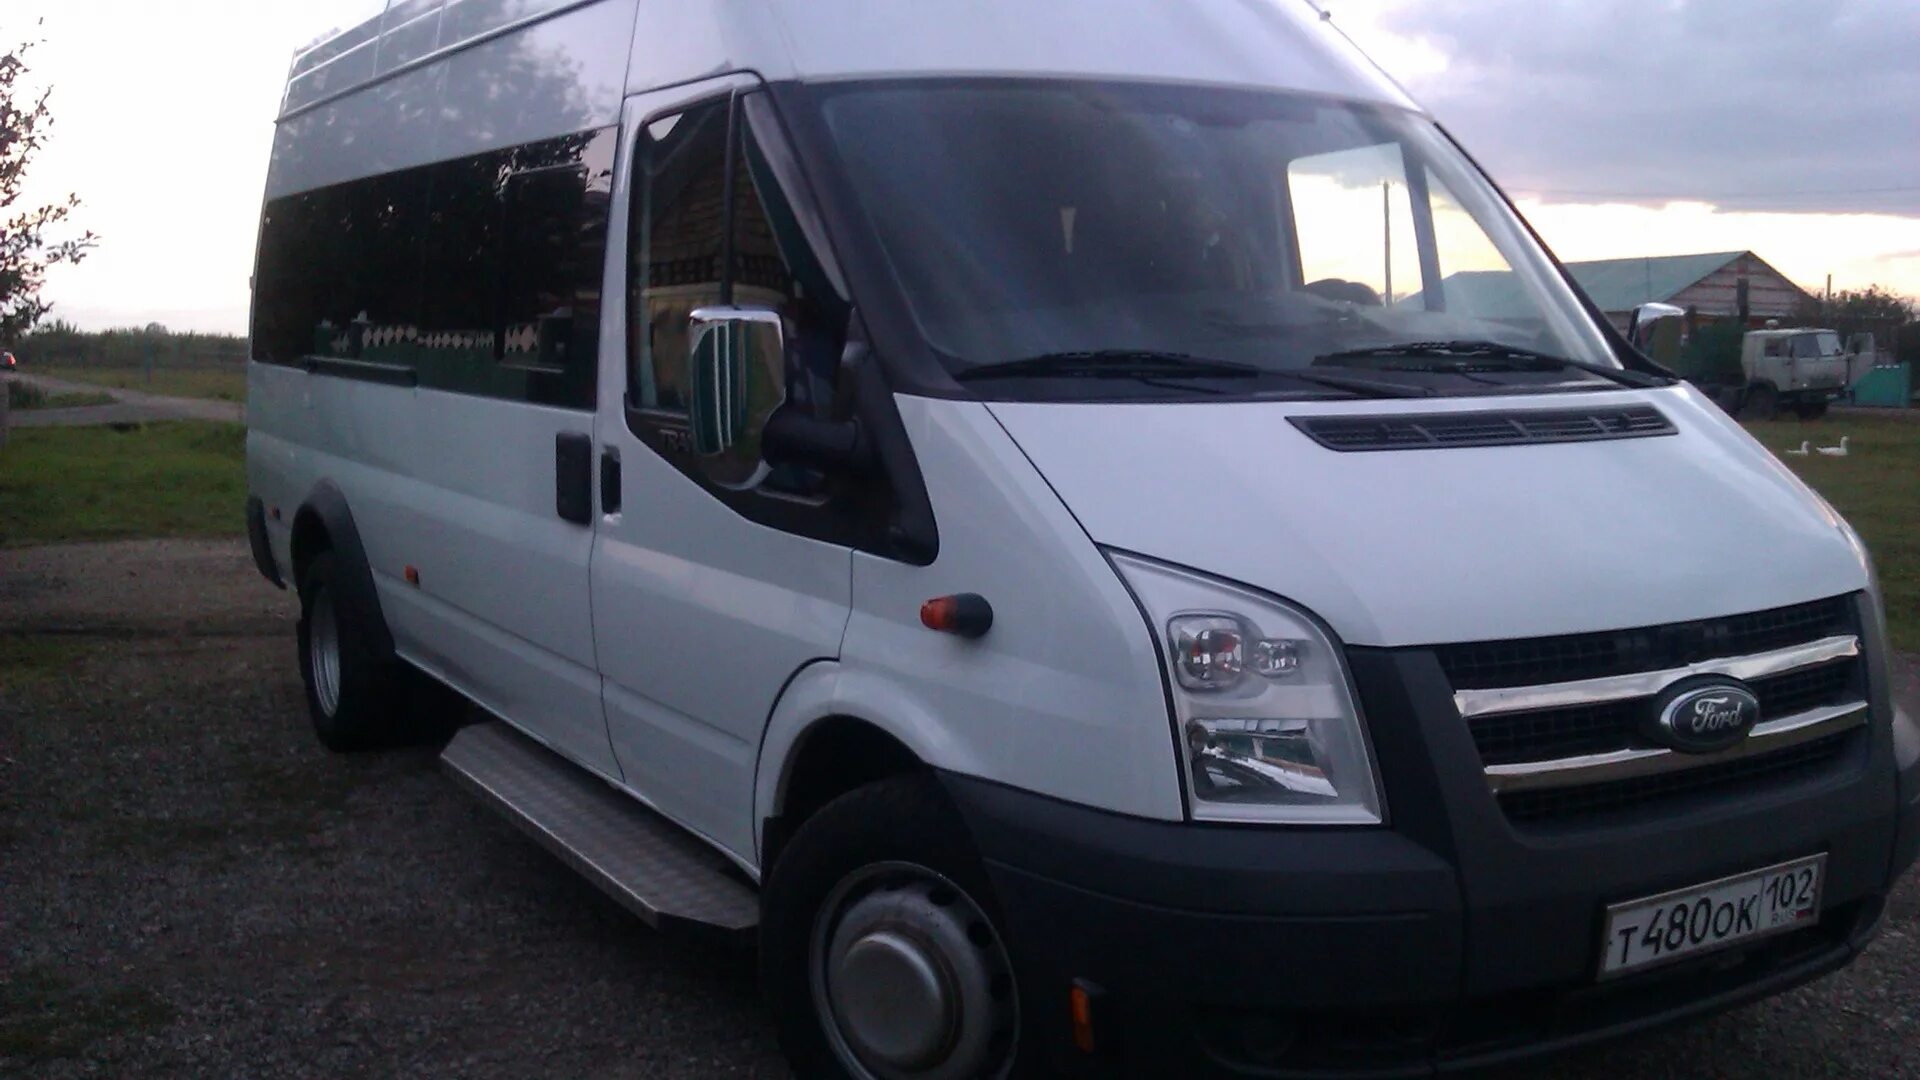 Ford Transit 2011. Форд Транзит 2011 год 2.5. Форд Транзит бус 2011 года. Ford Transit 2011 t350.